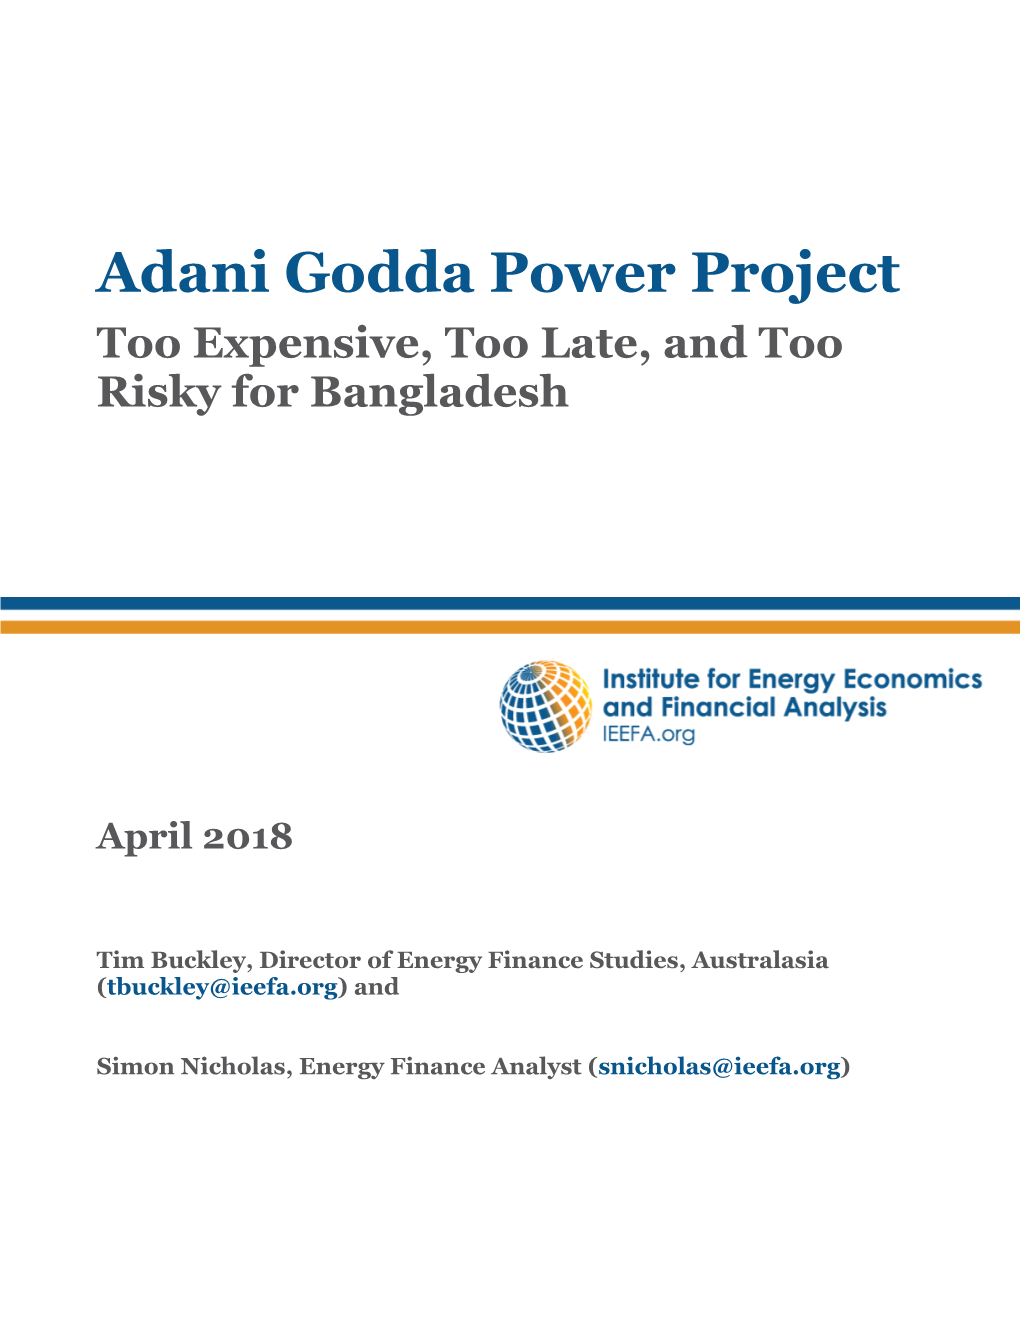 Adani Godda Power Project Too Expensive, Too Late, and Too Risky for Bangladesh